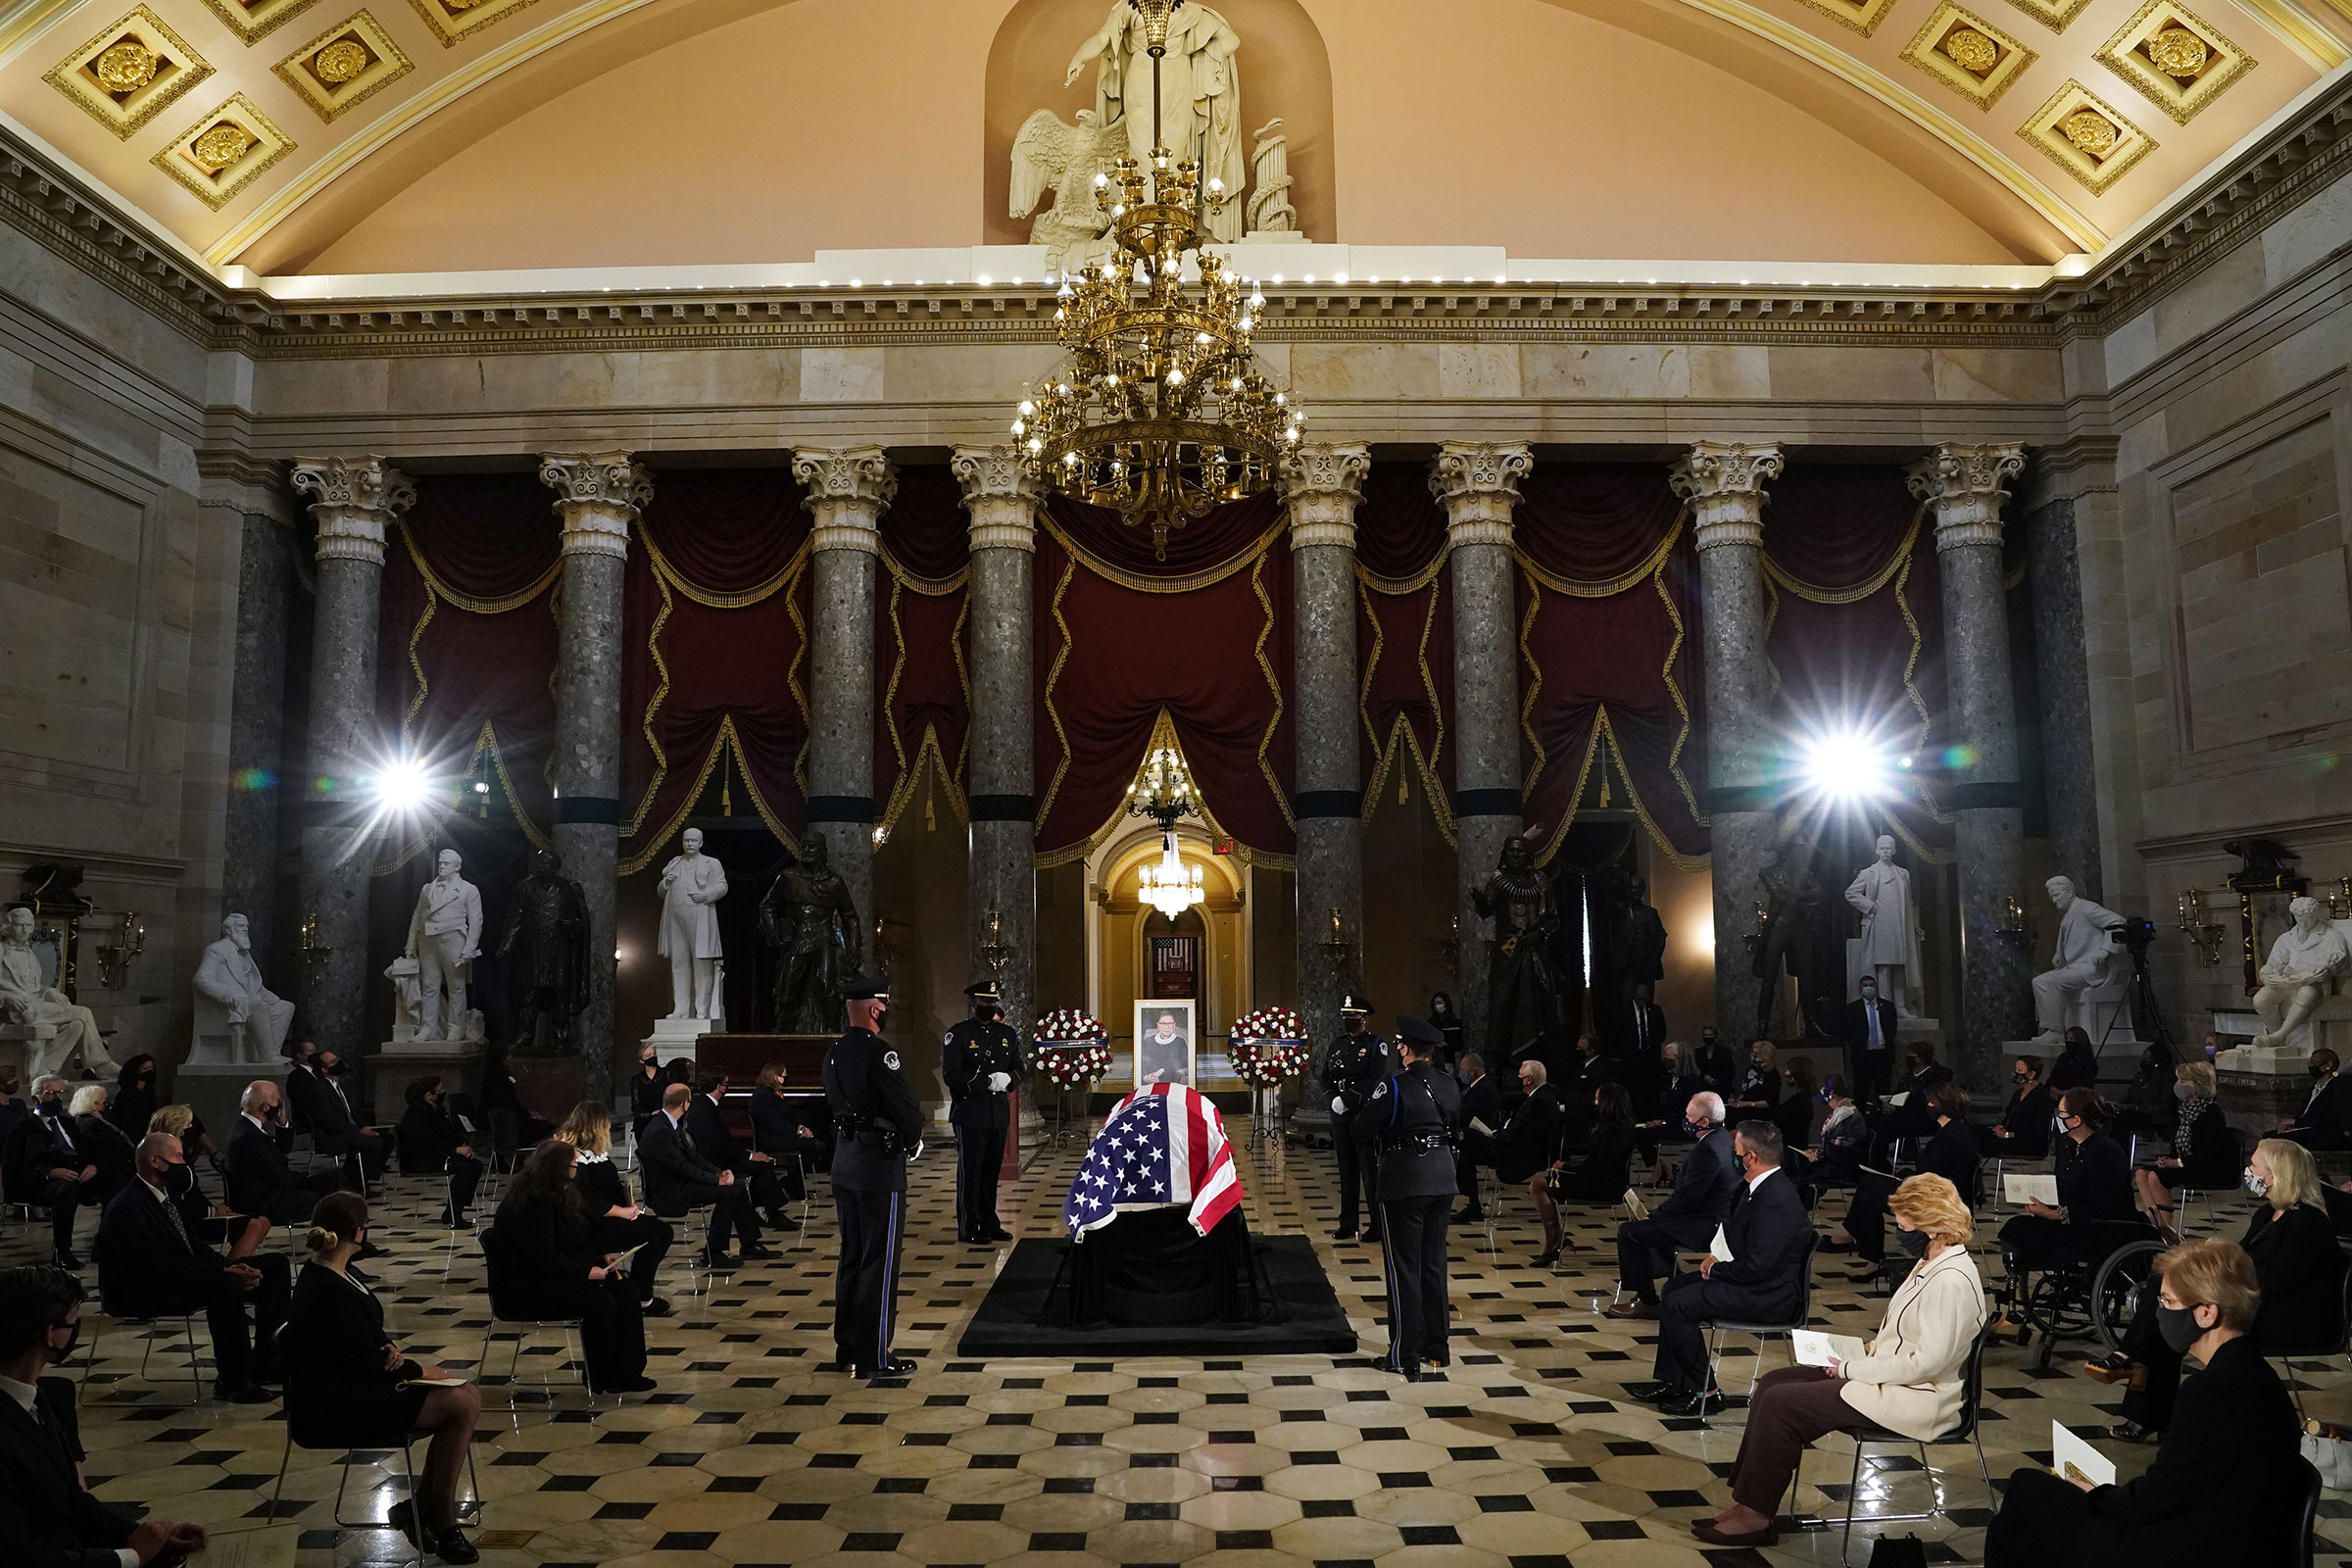 The flag-draped casket of the late Associate Justice Ruth Bader Ginsburg lies in state in Statuary Hall of the US Capitol during a memorial service in her honor on Sept. 25, 2020. (Erin Schaff—Pool/Getty Images)